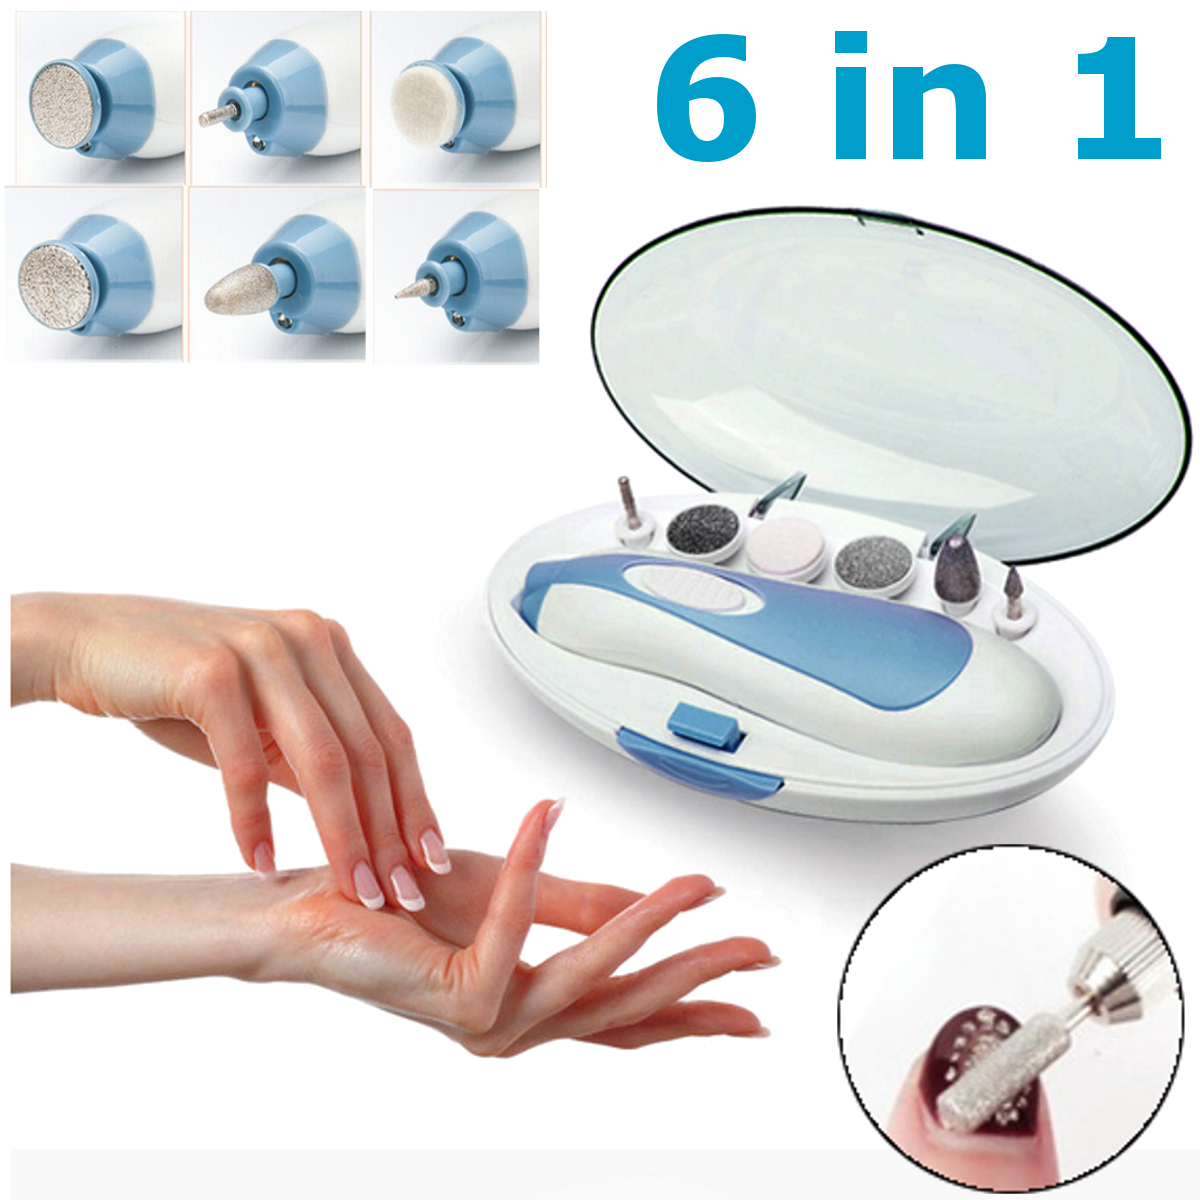 Electric-Nail-File-Drill-Kit-Manicure-Grooming-Multi-function-Pedicure-Machine-1639495-3